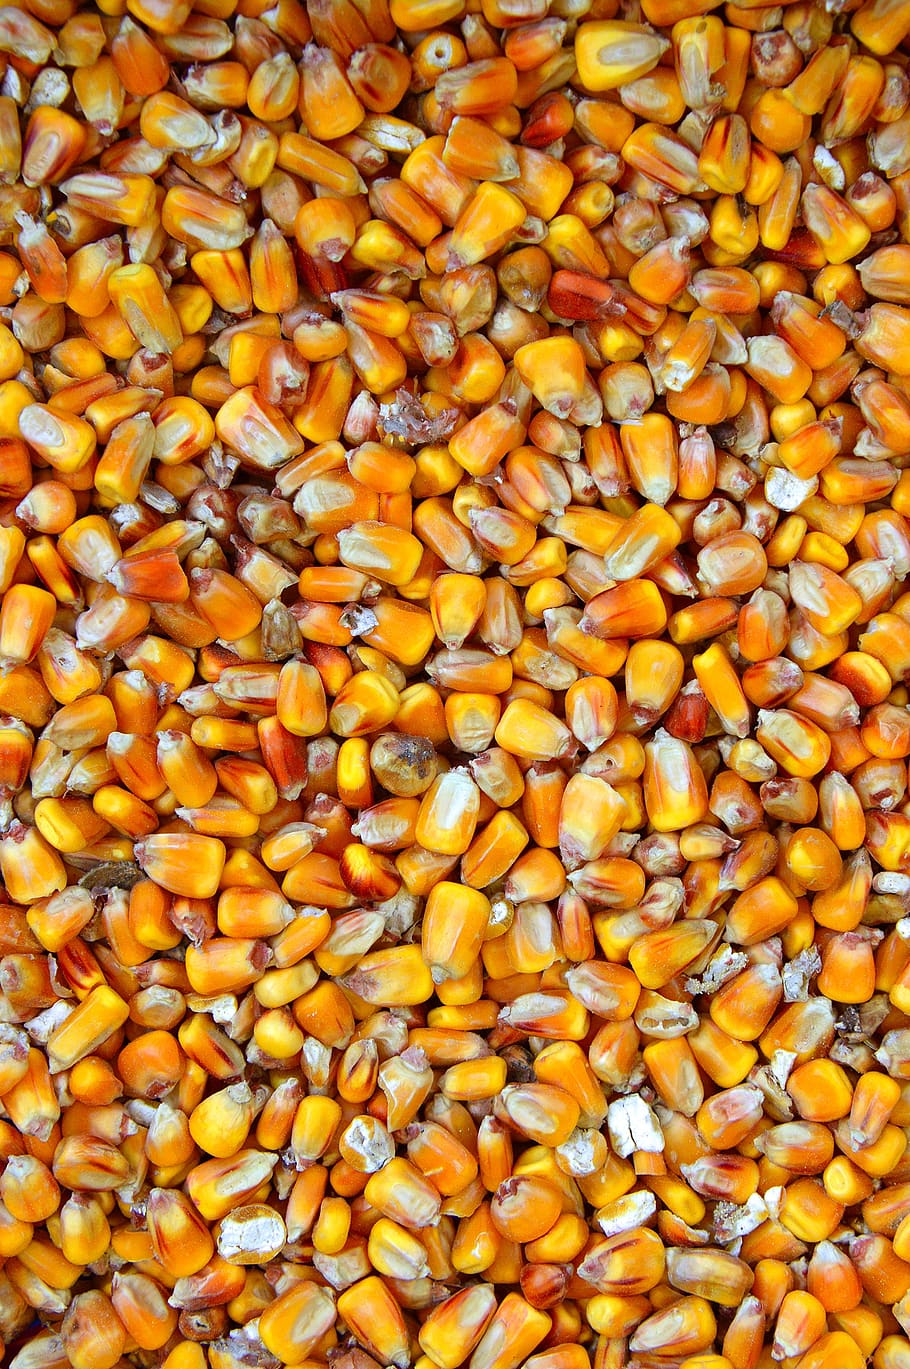 corn, yellow, plants, agricultural plant, fodder corn, crop, food, mag, produce, vegetable